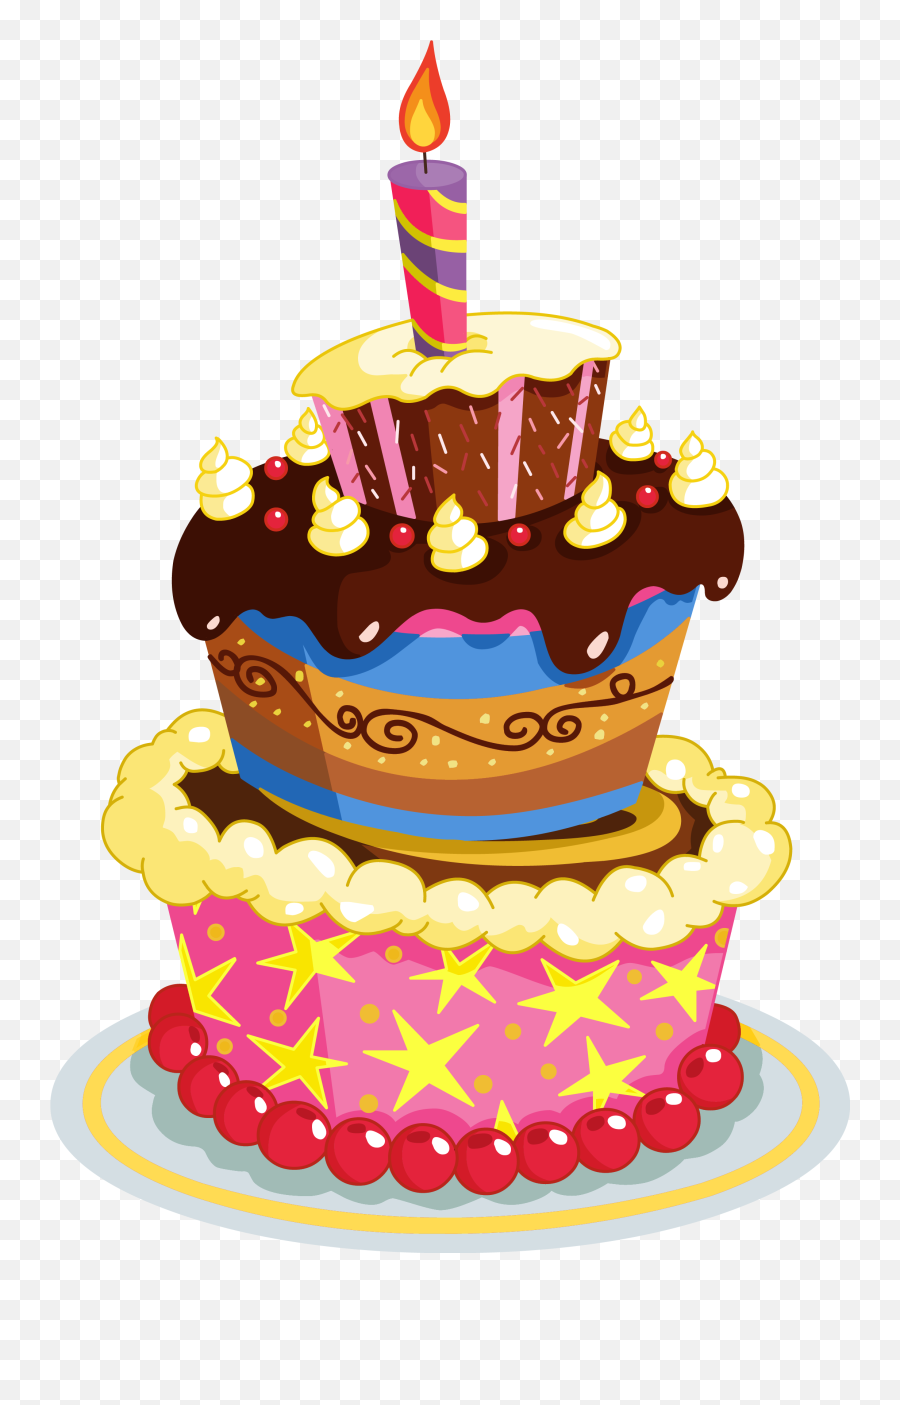 Birthday Cake Silhouette for Icon, Symbol, Pictogram, Apps, Website, Art  Illustration, Logo or Graphic Design Element. Format PNG 13366658 PNG